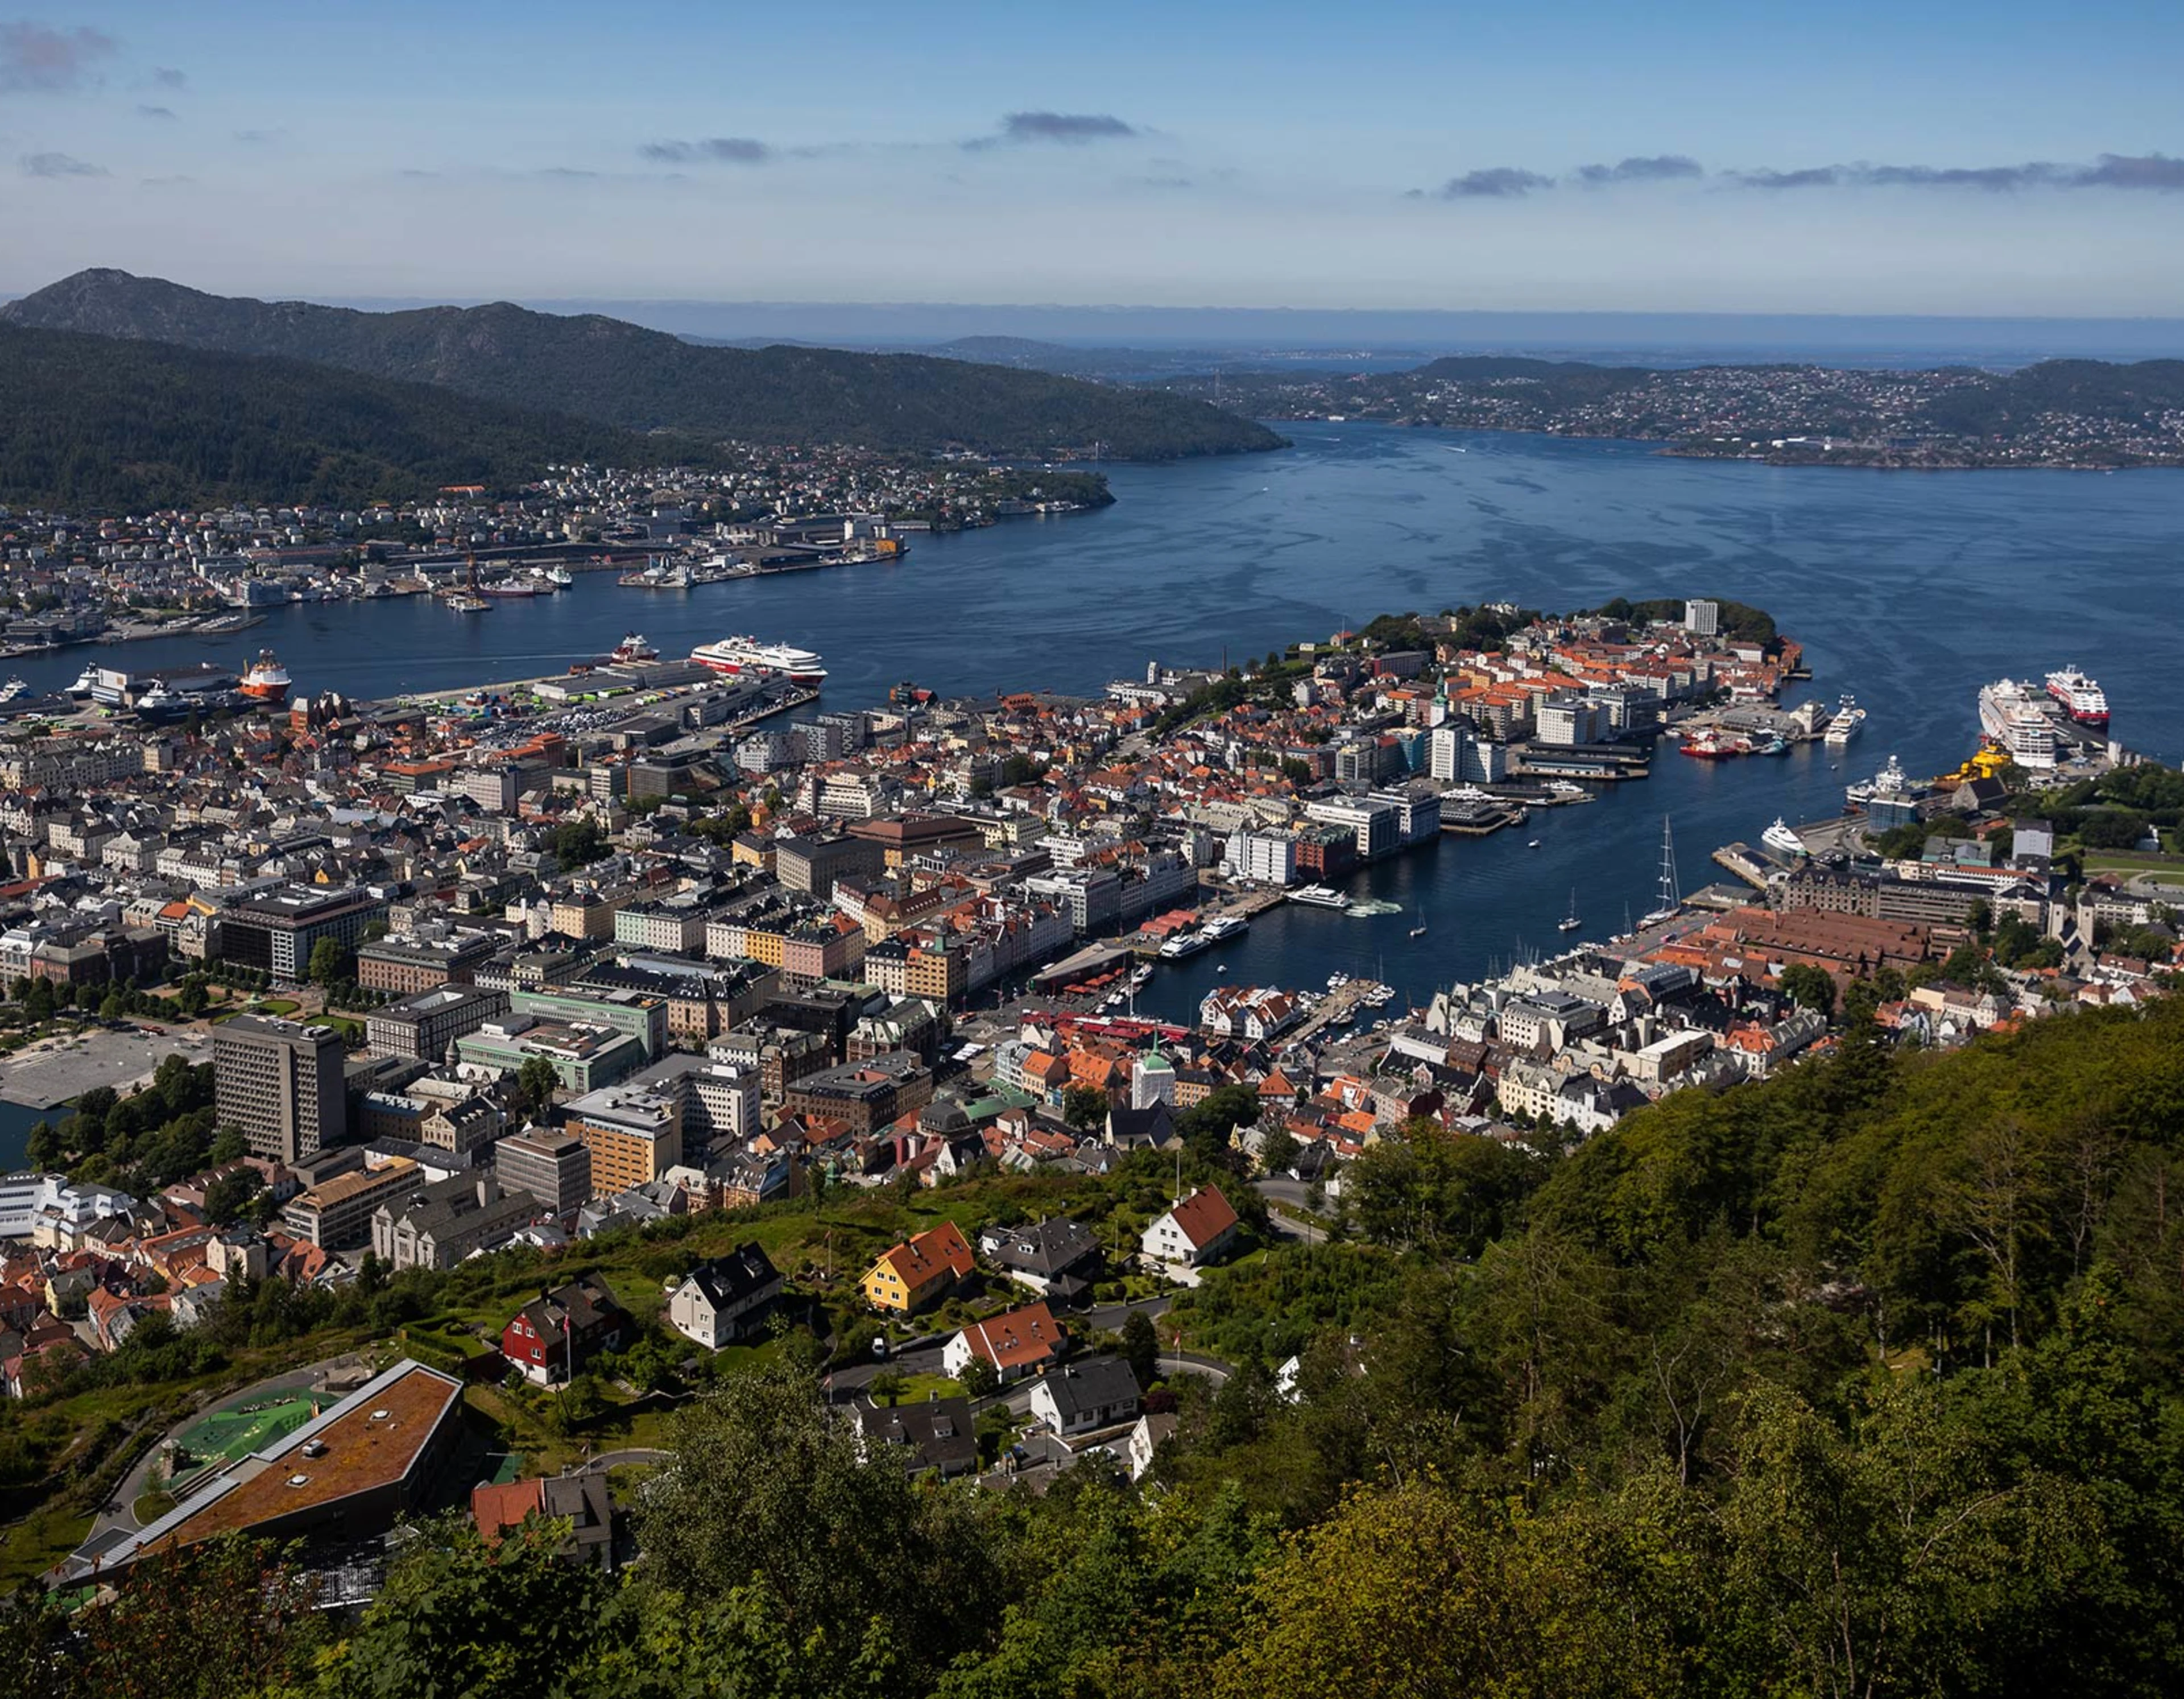 The view over Bergen